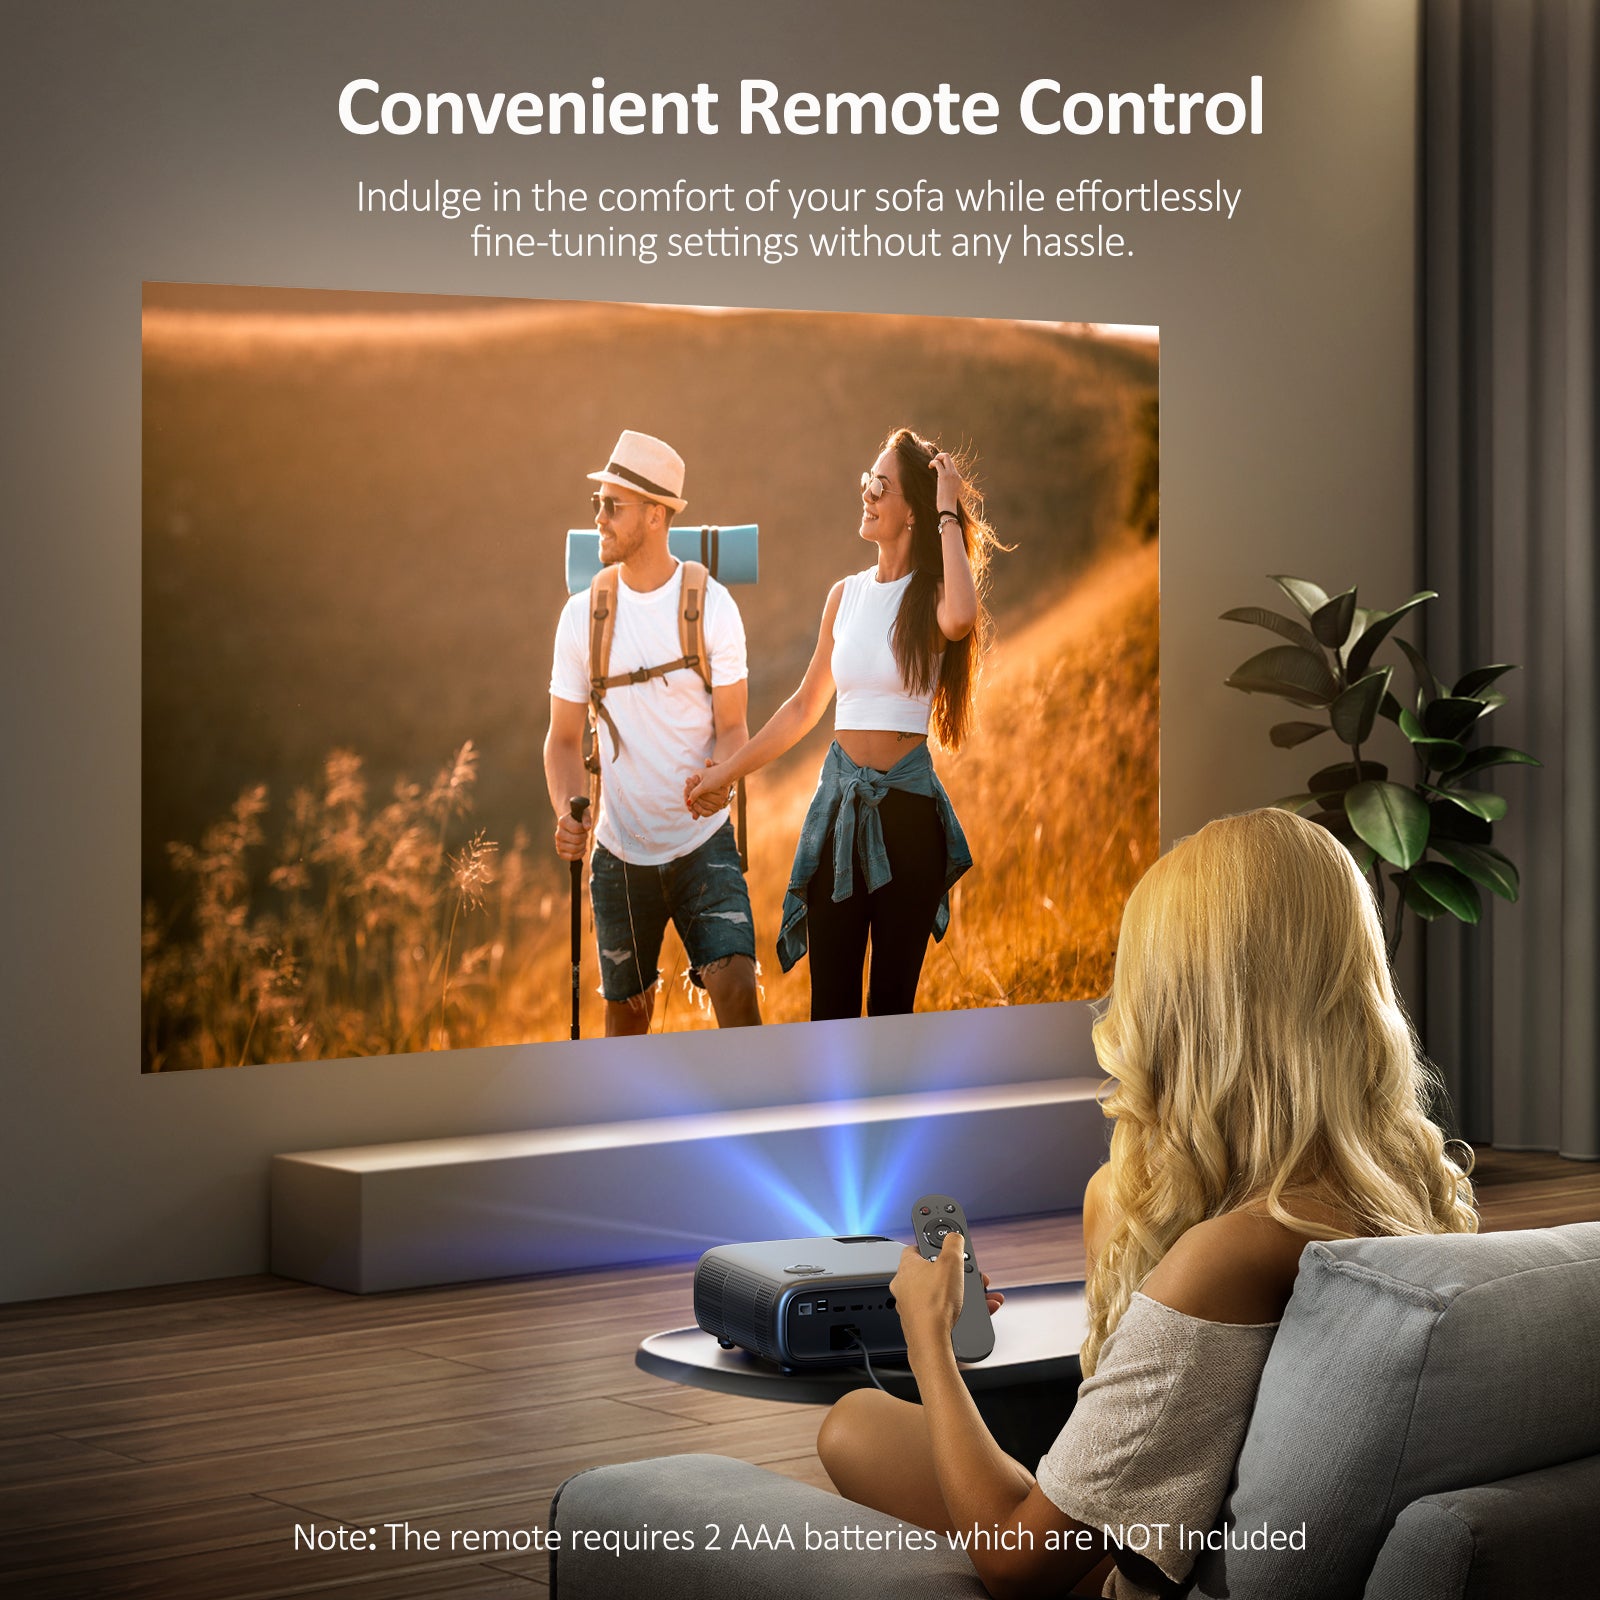 One person is sitting on the sofa, using the PJ40 remote control to watch a movie with the PJ40 projector.